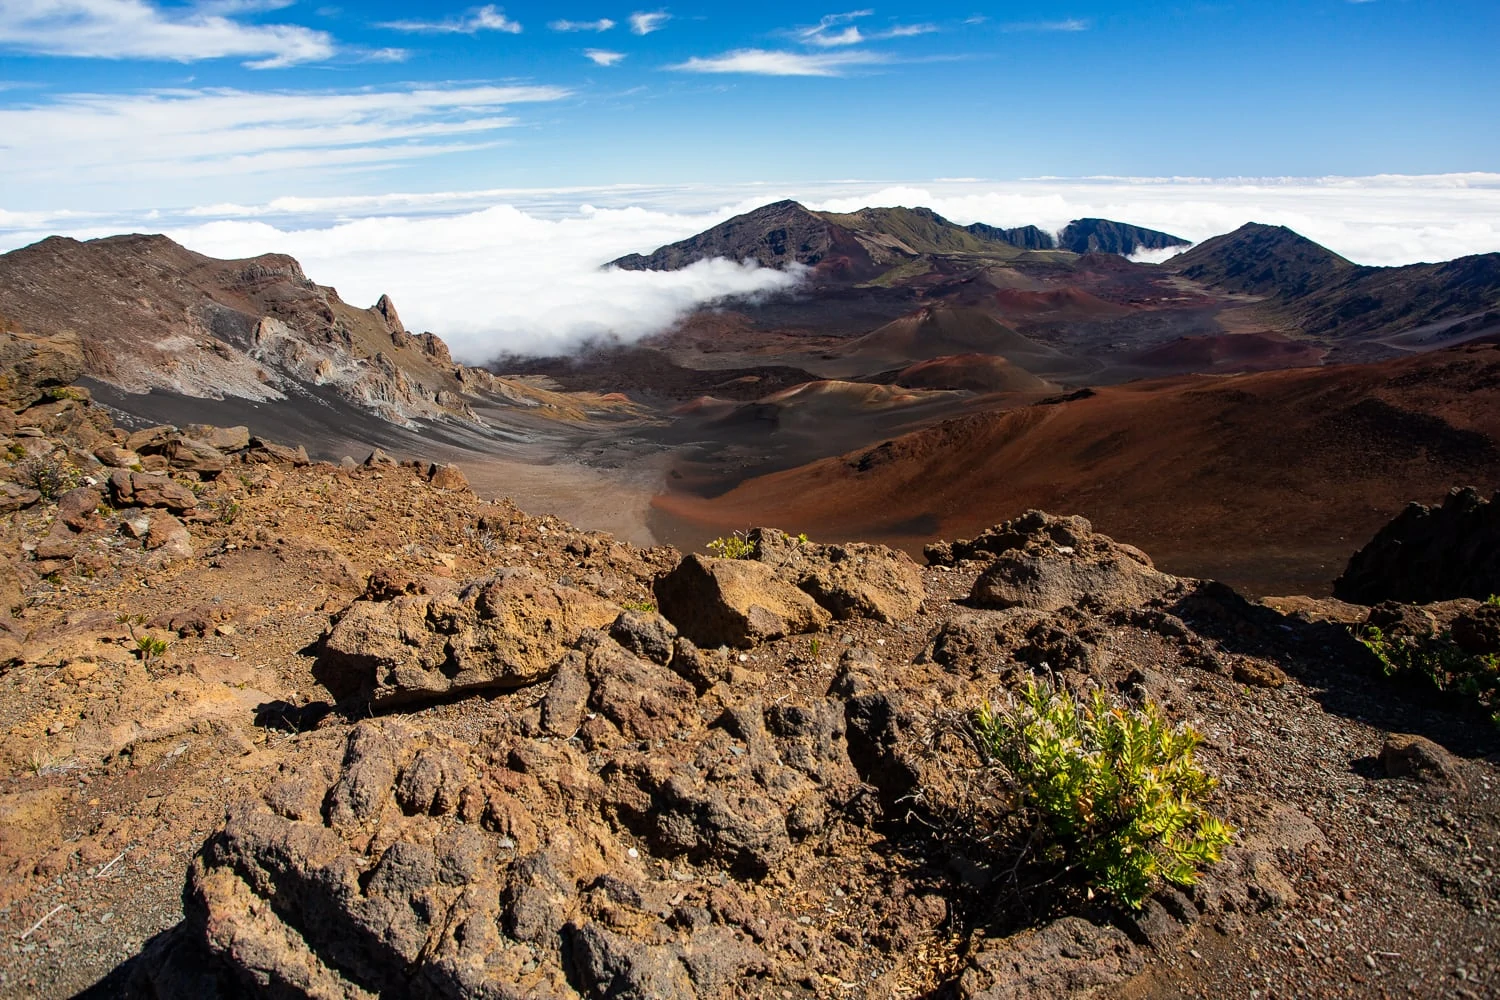 The view of Haleakala volcano's colorful crater from the Visitors' Center, which is a designated ceremony location in Haleakala National Park.